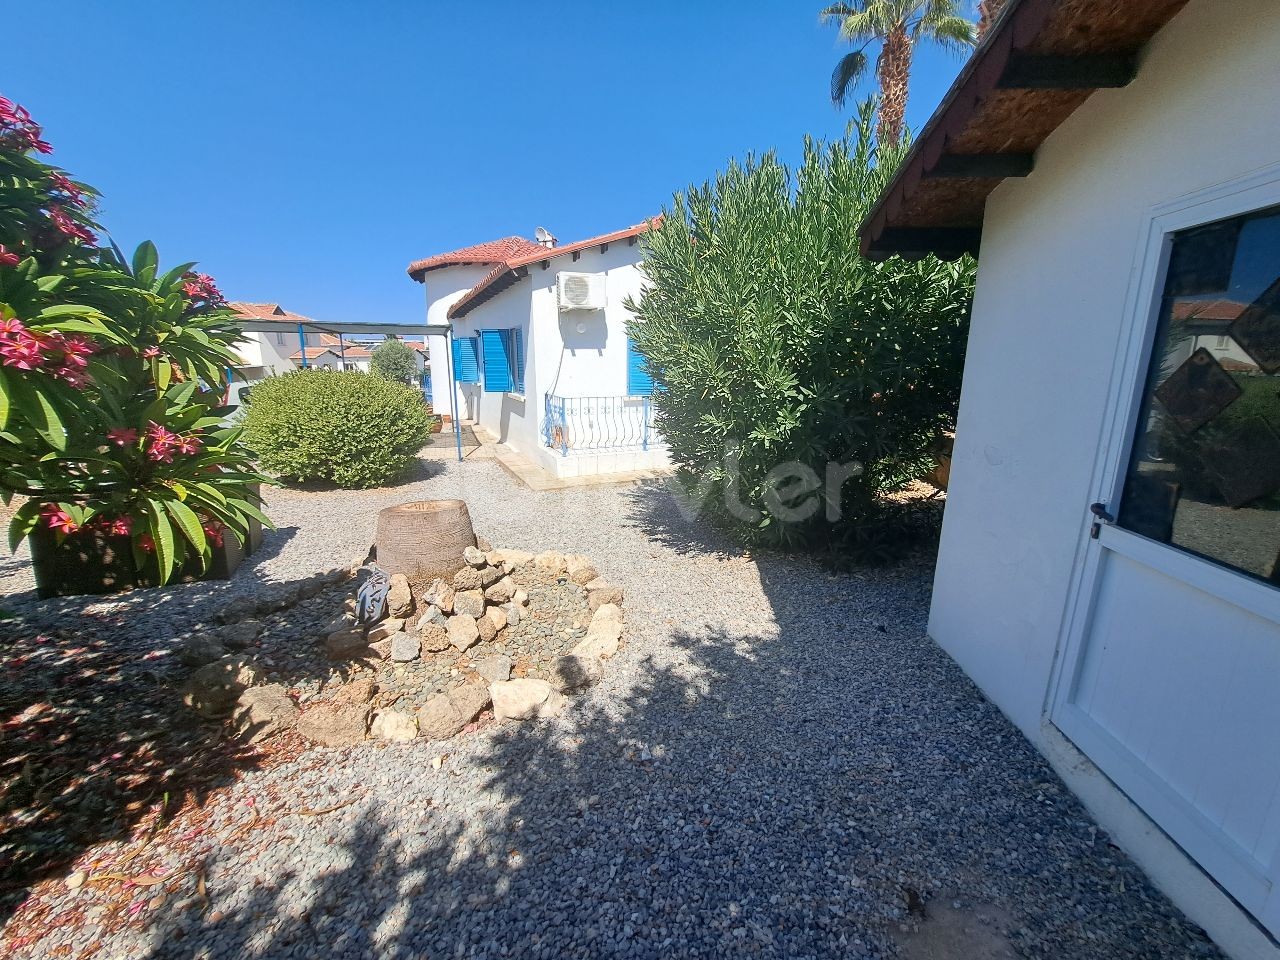 DETACHED VILLA WITH PRIVATE POOL FOR RENT